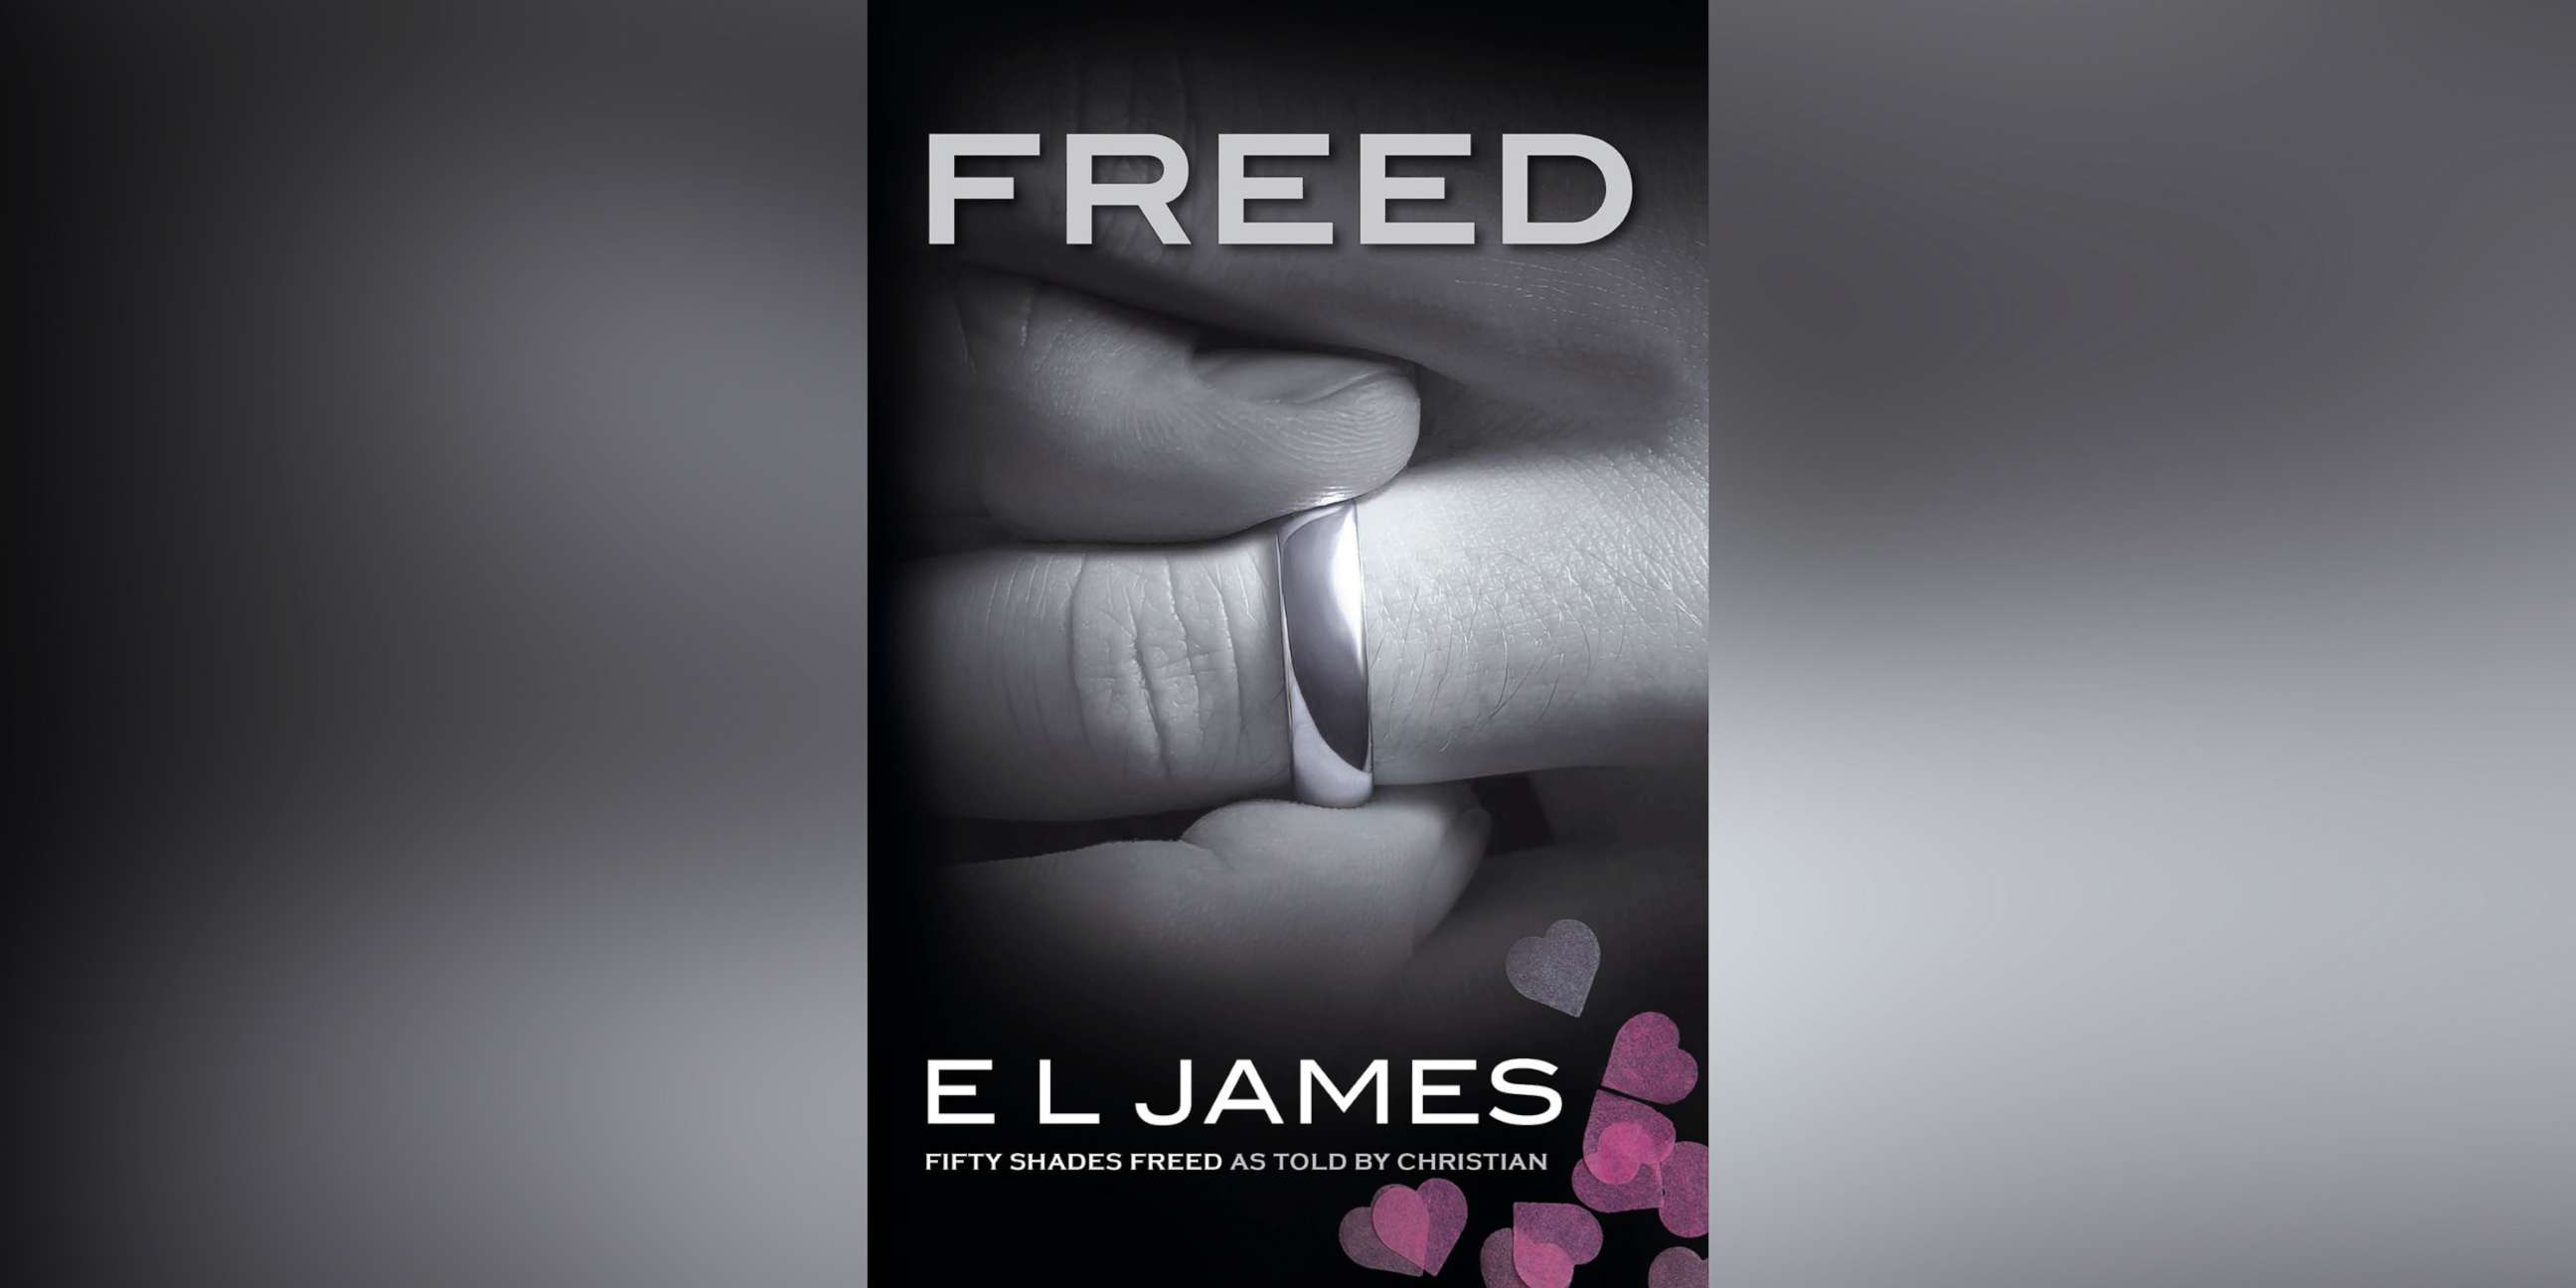 PHOTO: The cover of the book, "Freed," by E.L. James.